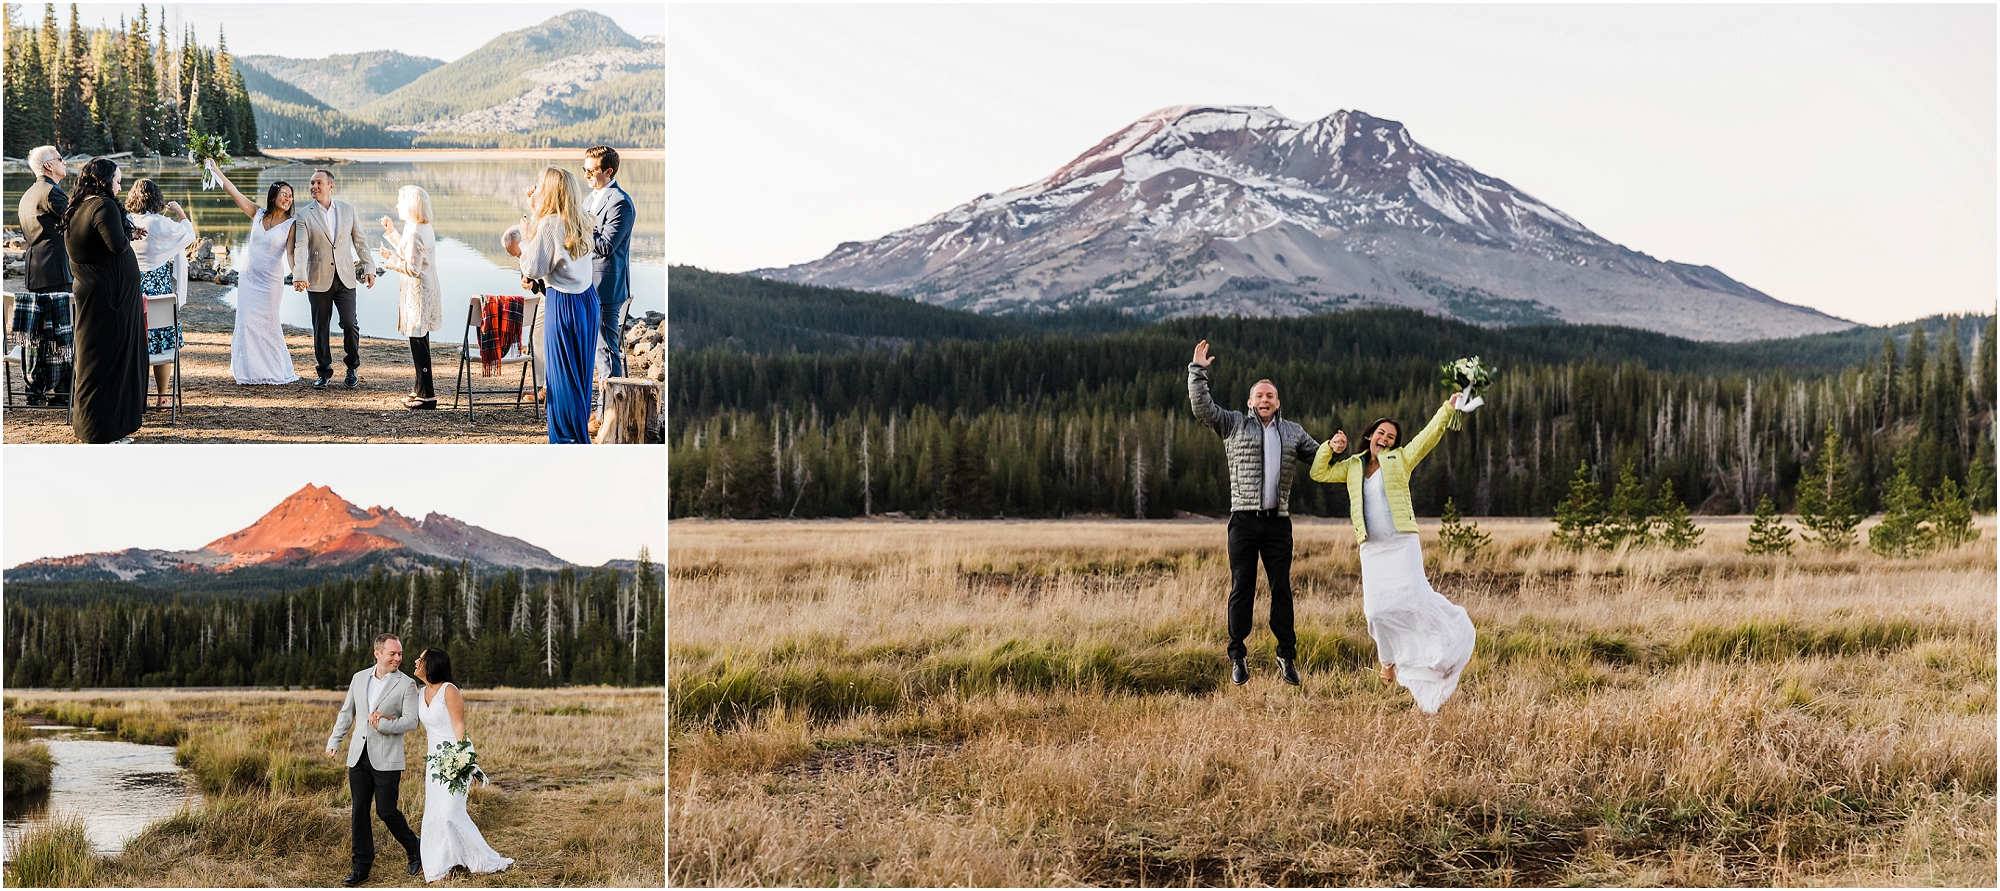 An adventurous elopement at Sparks Lake in Bend, Oregon with gorgeous Cascade Mountain views. | Erica Swantek Photography